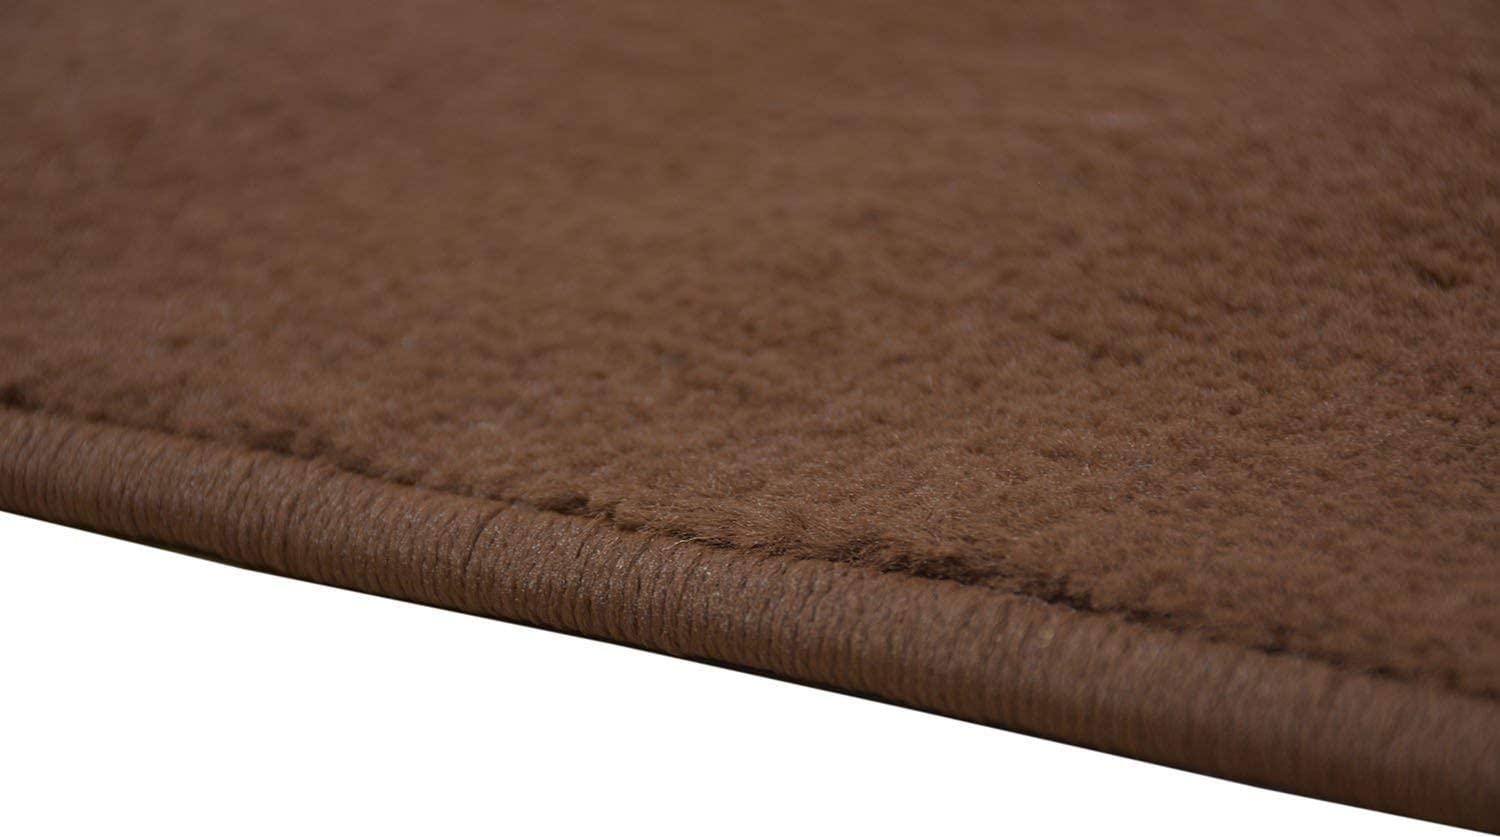 Machine Washable Custom Size Runner Rug Solid Brown Color Skid Resistant Rug Runner Customize Up to 50 Feet and 30 Inch Width Runner Rug